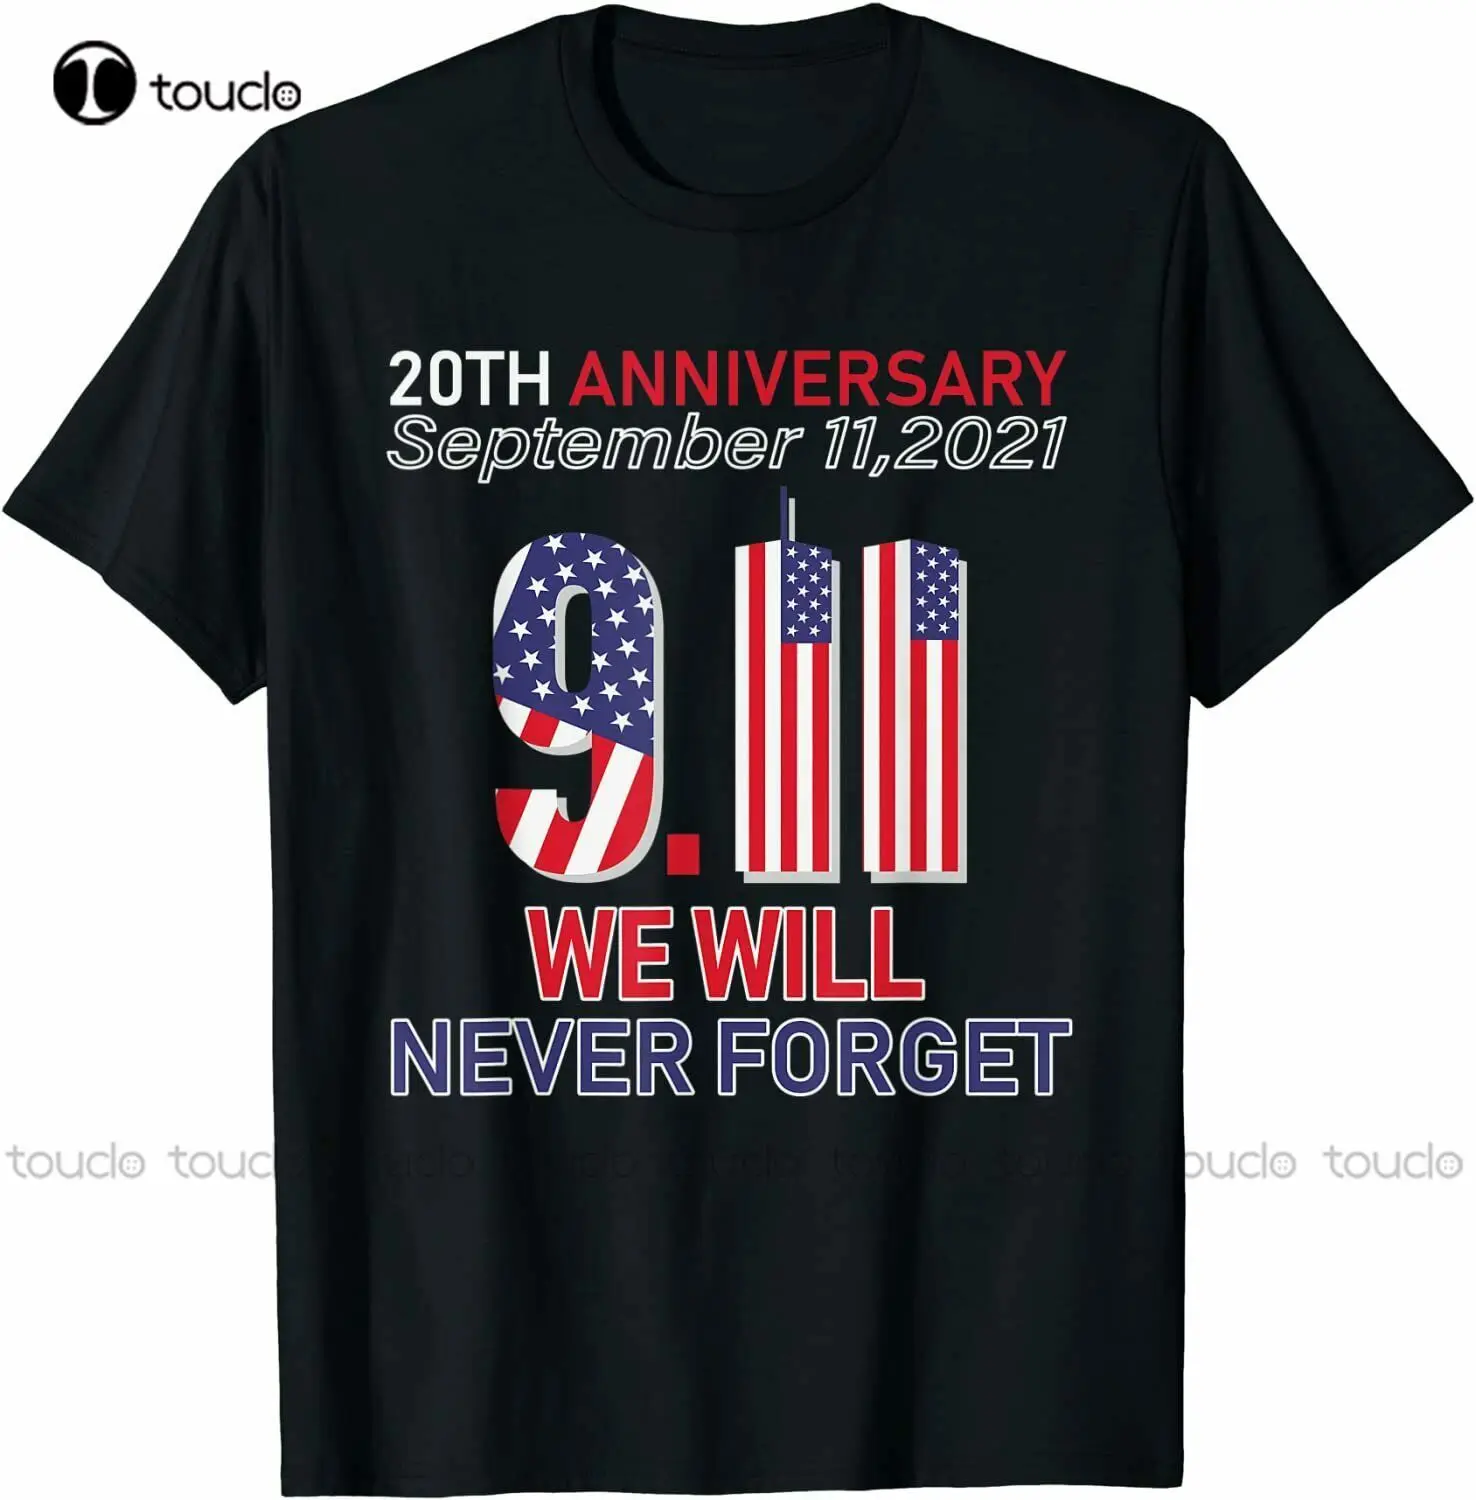 

New 20Th Anniversary 9/11 We Will Never Forget Patriot Day 2021 T-Shirt Black Tshirt Cotton Tee S-5Xl